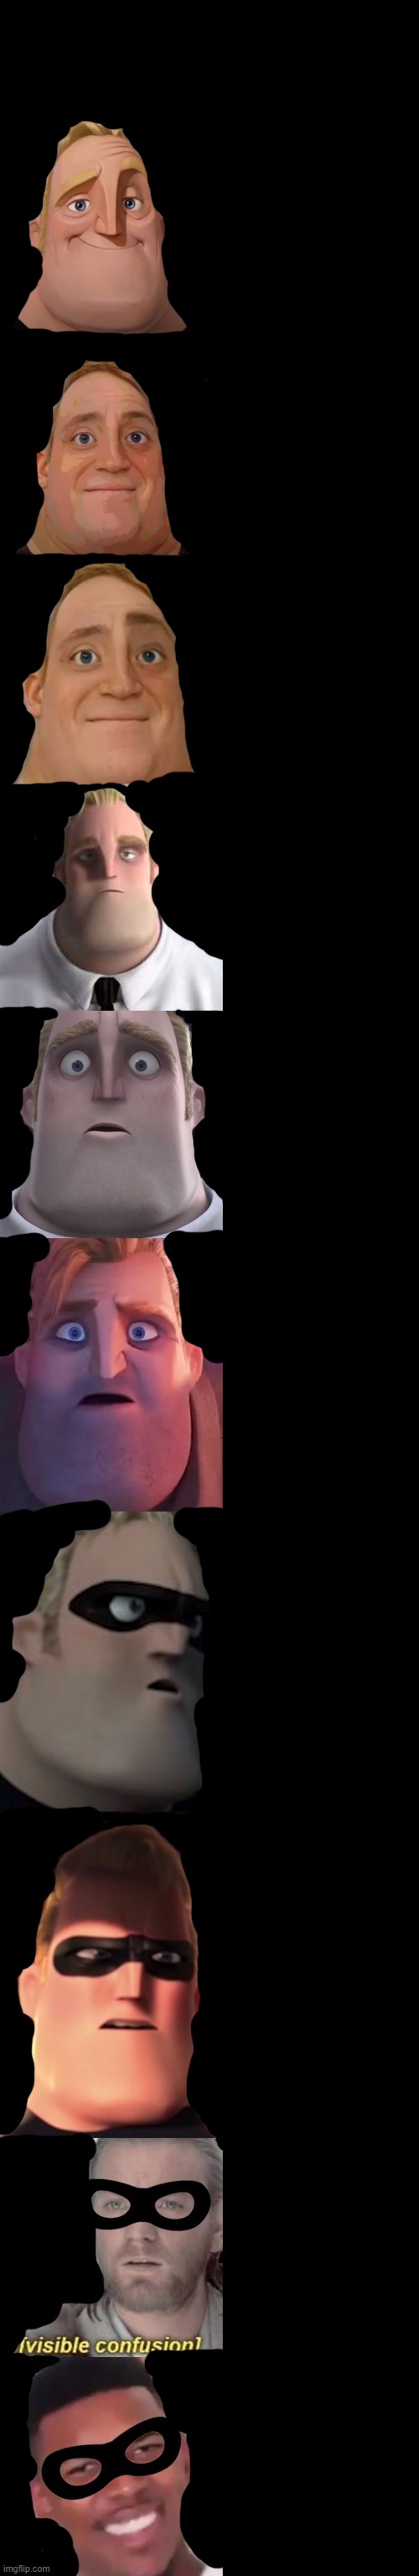 Mr Incredible becoming confused | image tagged in mr incredible becoming confused | made w/ Imgflip meme maker